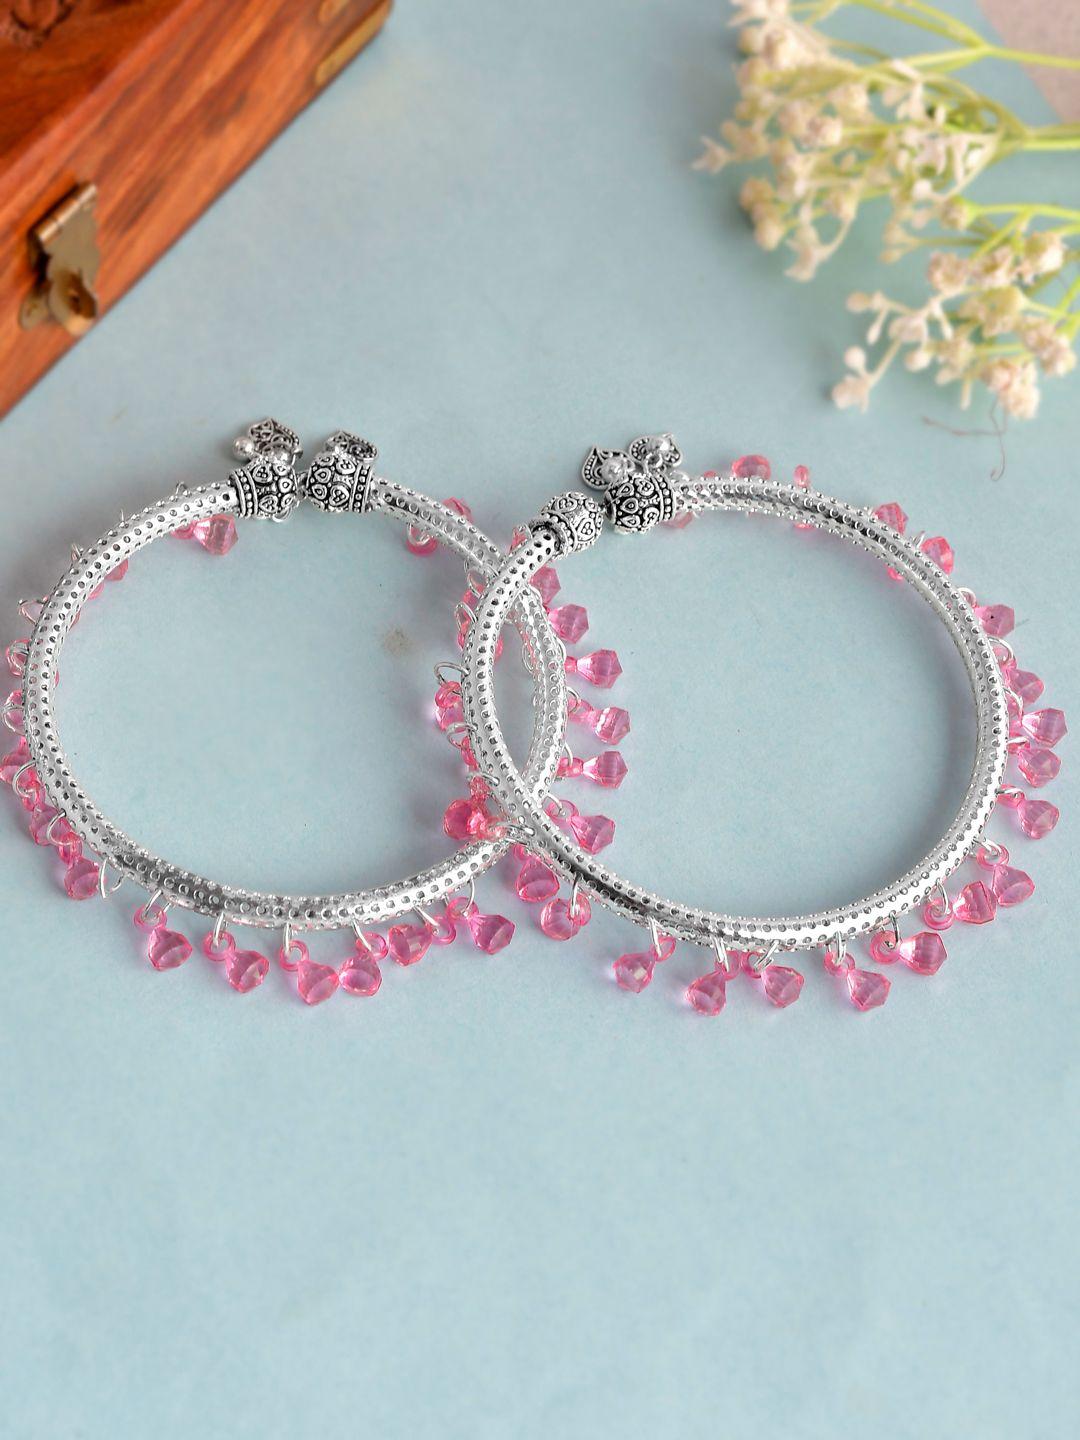 silvermerc designs set of 2 silver-plated & pink beaded kada anklets